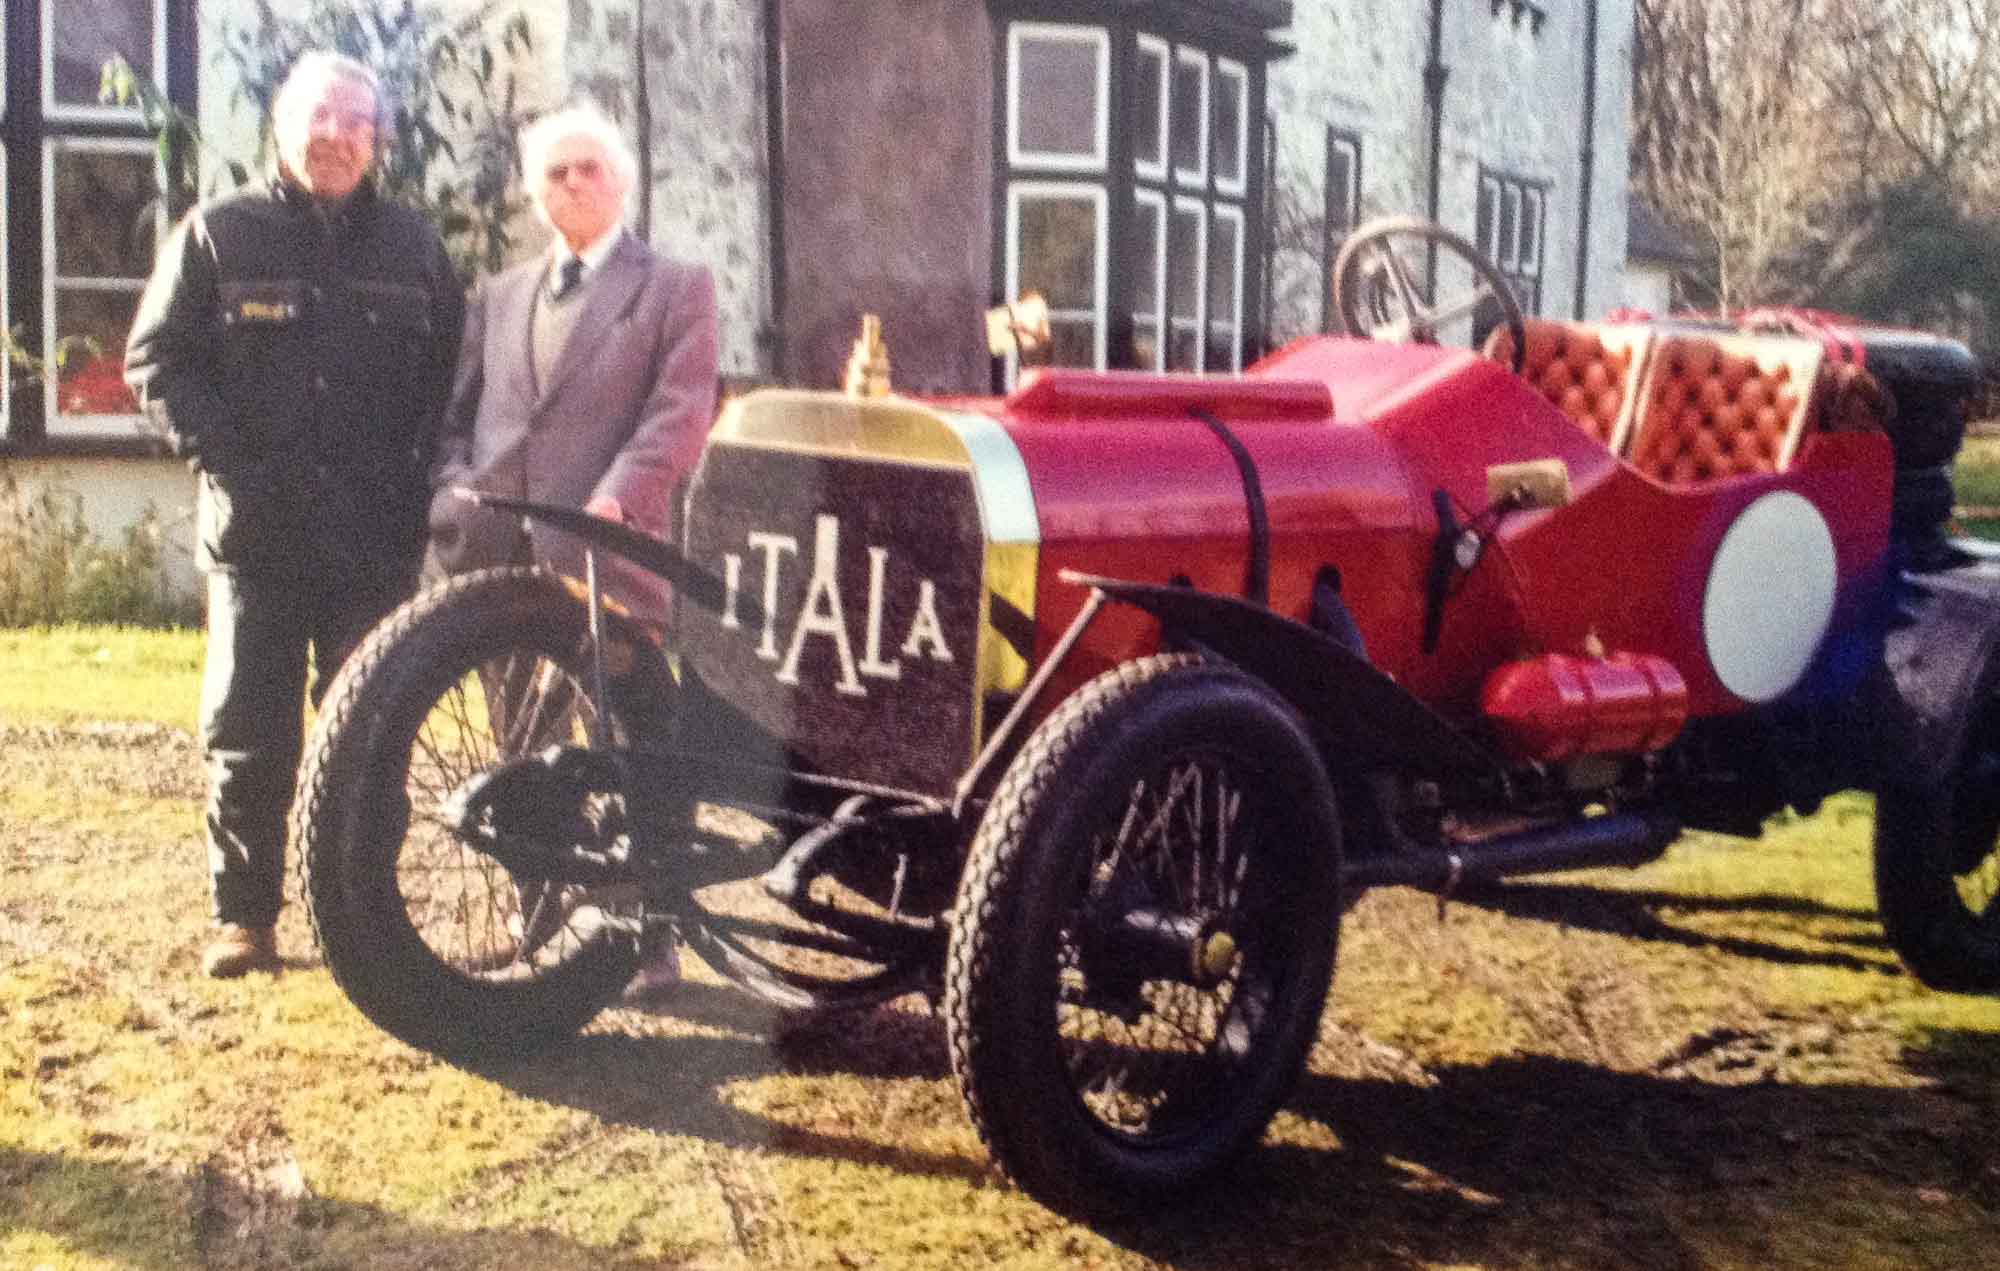 George Daniels with Bill Boddy, former editor of Motor Sport with the Sam Clutton Itala